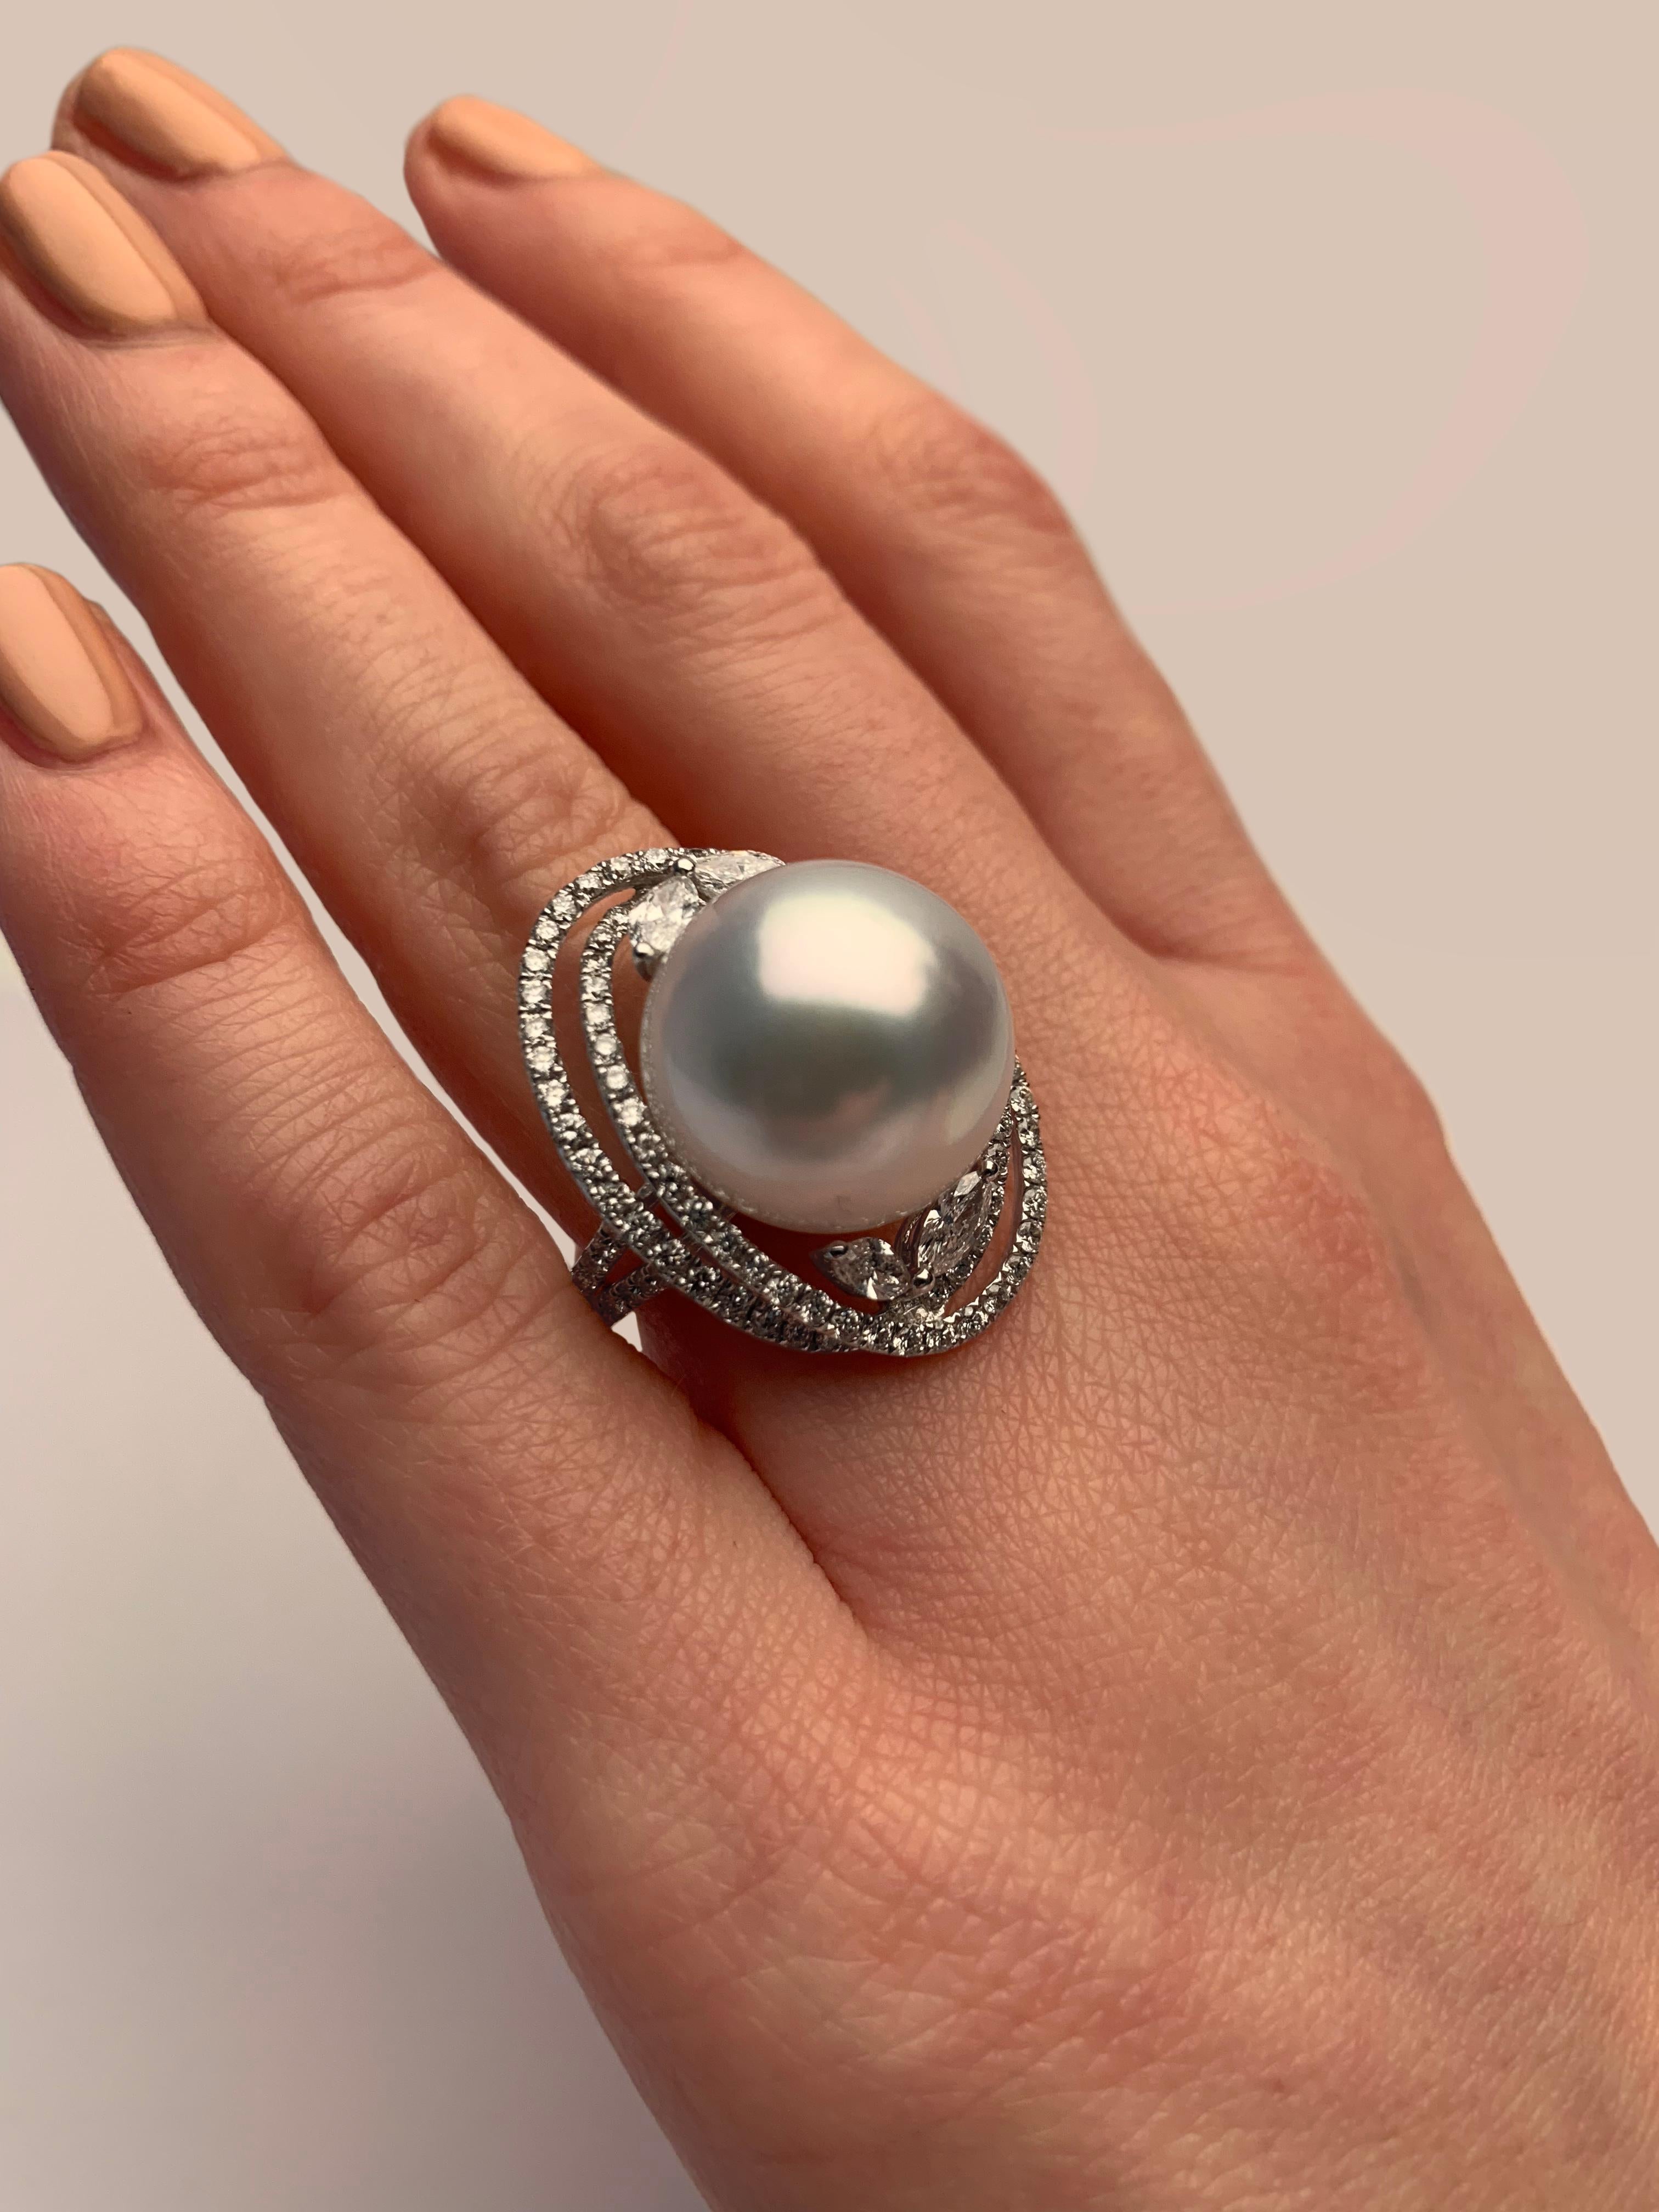 This elegant ring by Yoko London features a superior South Sea pearl set among an ornate arrangement of round and marquise cut diamonds. Set in 18 Karat white gold to perfect enrich the radiance of the pearl and diamonds, this beautiful ring will